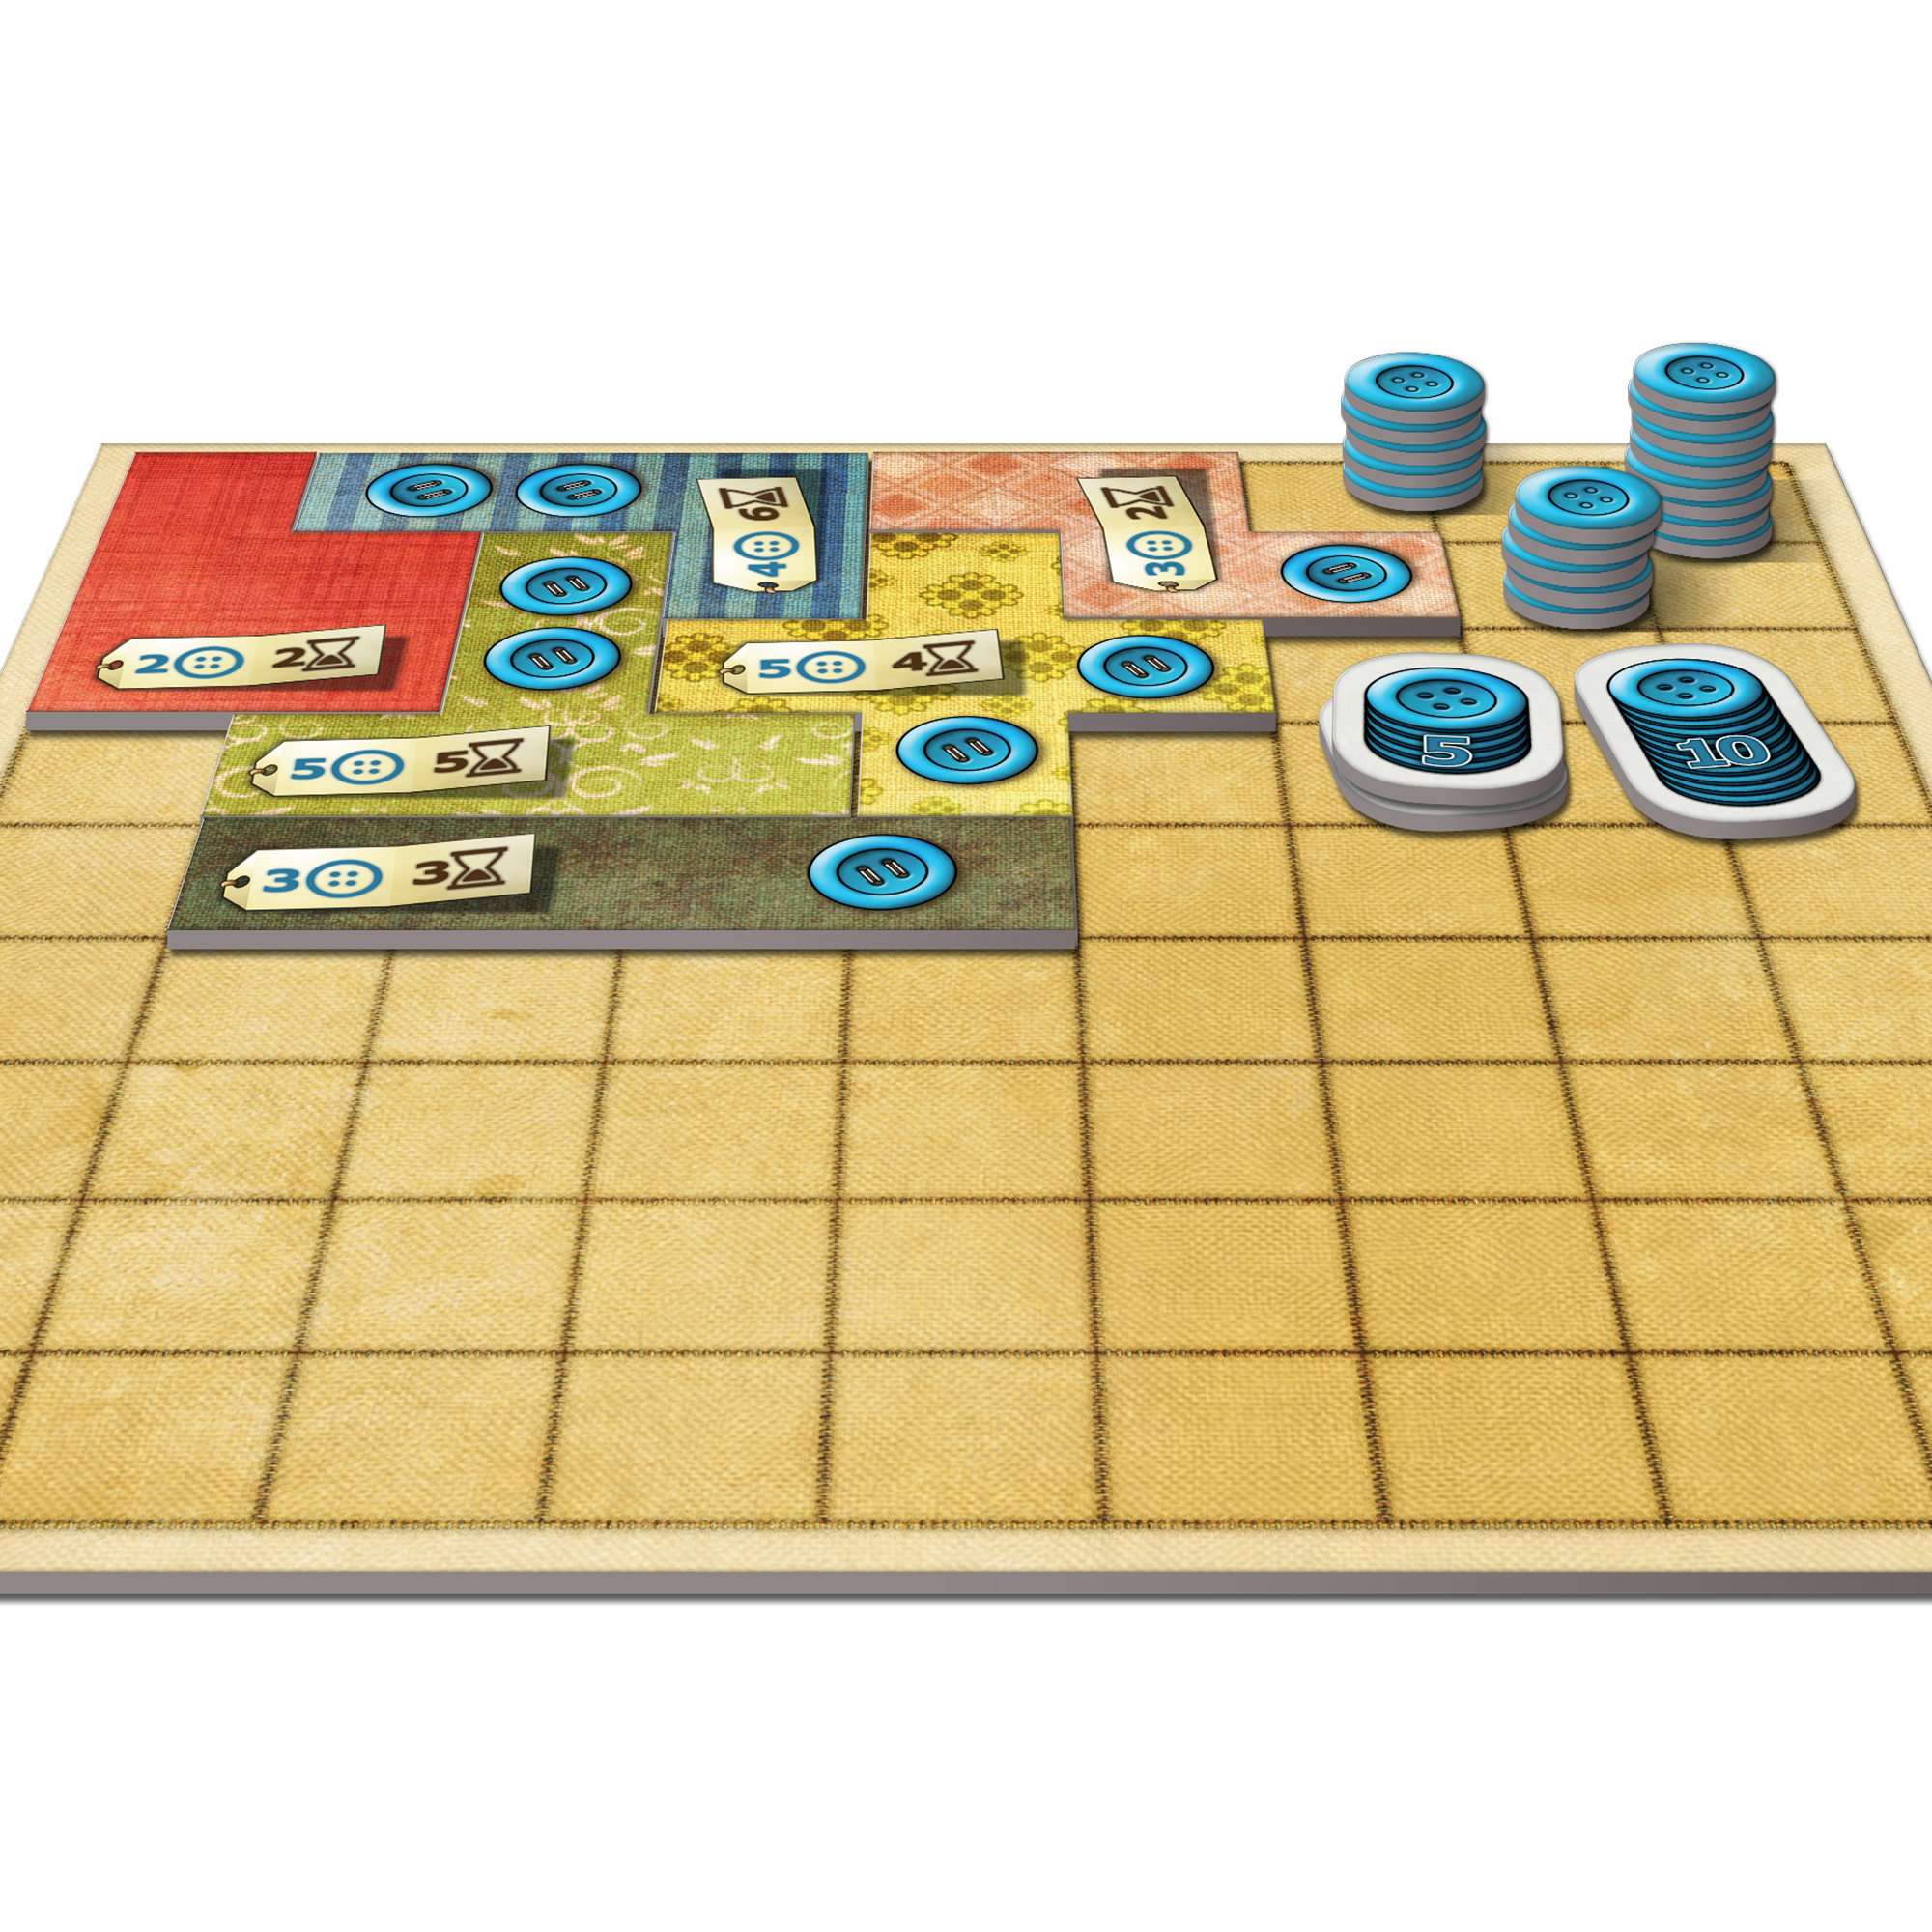 Patchwork Board Game for Ages 8 and up, From Asmodee - image 5 of 7